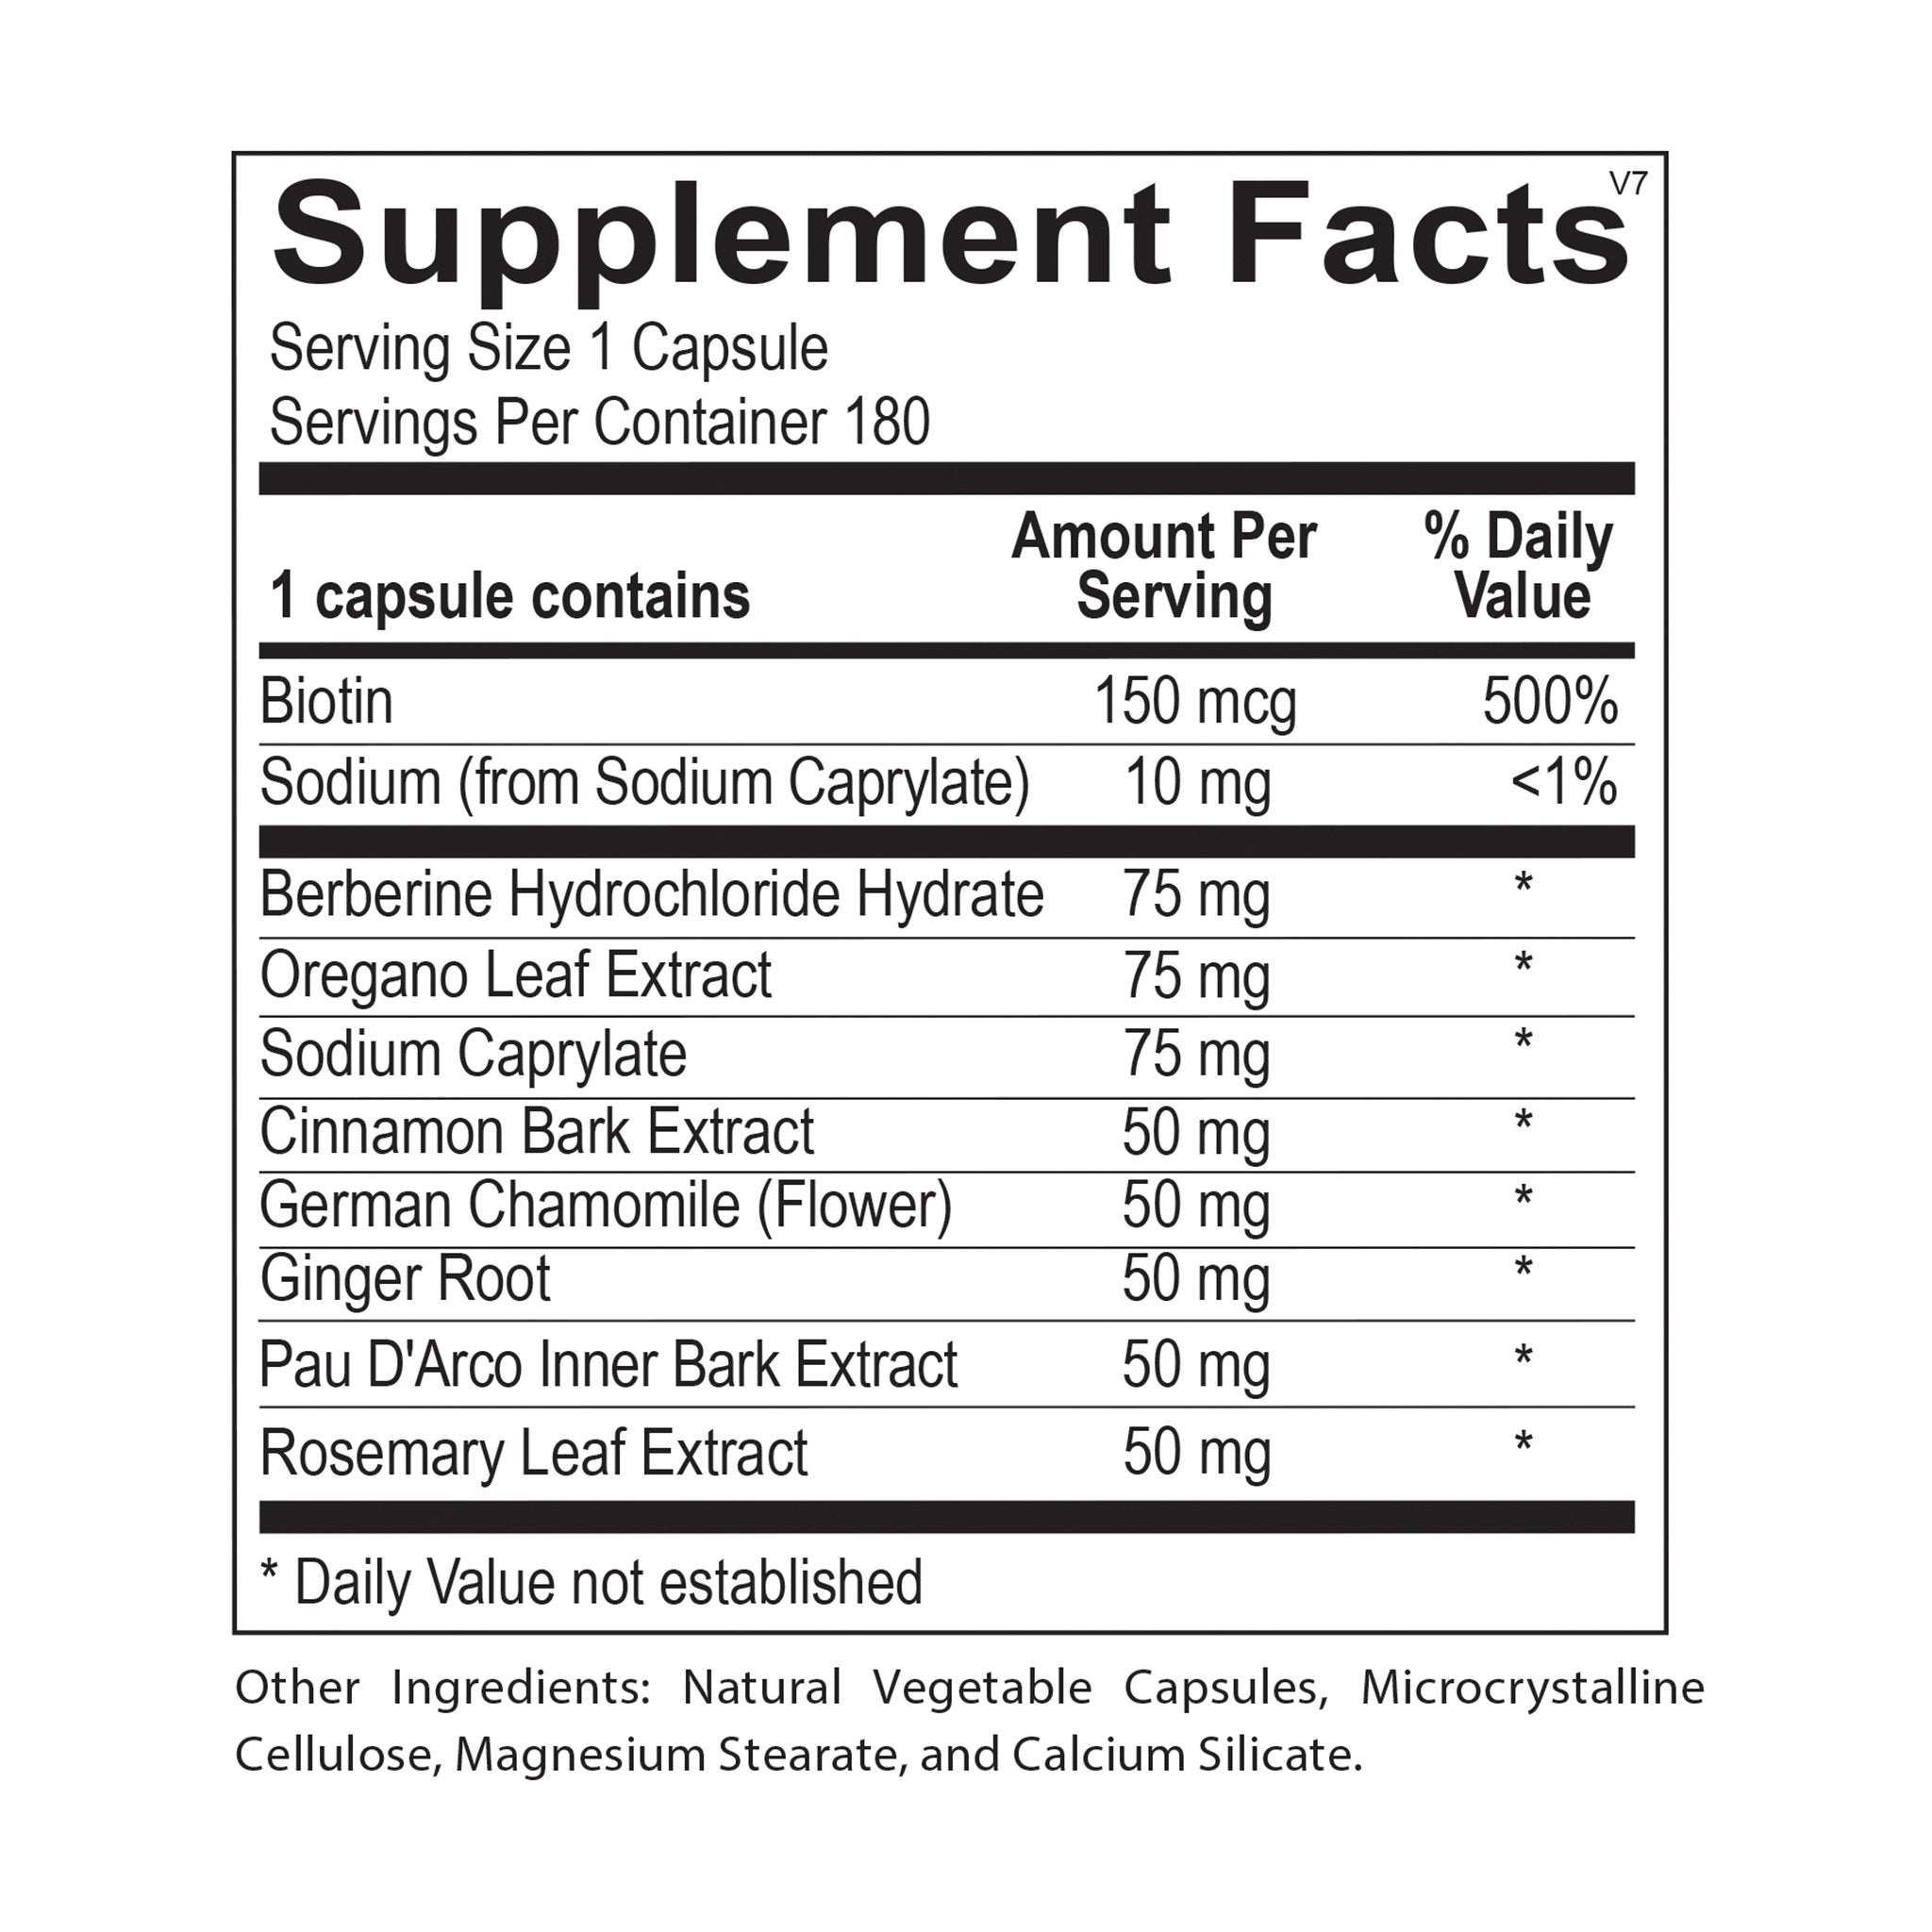 Supplement Facts for Candida Wellness